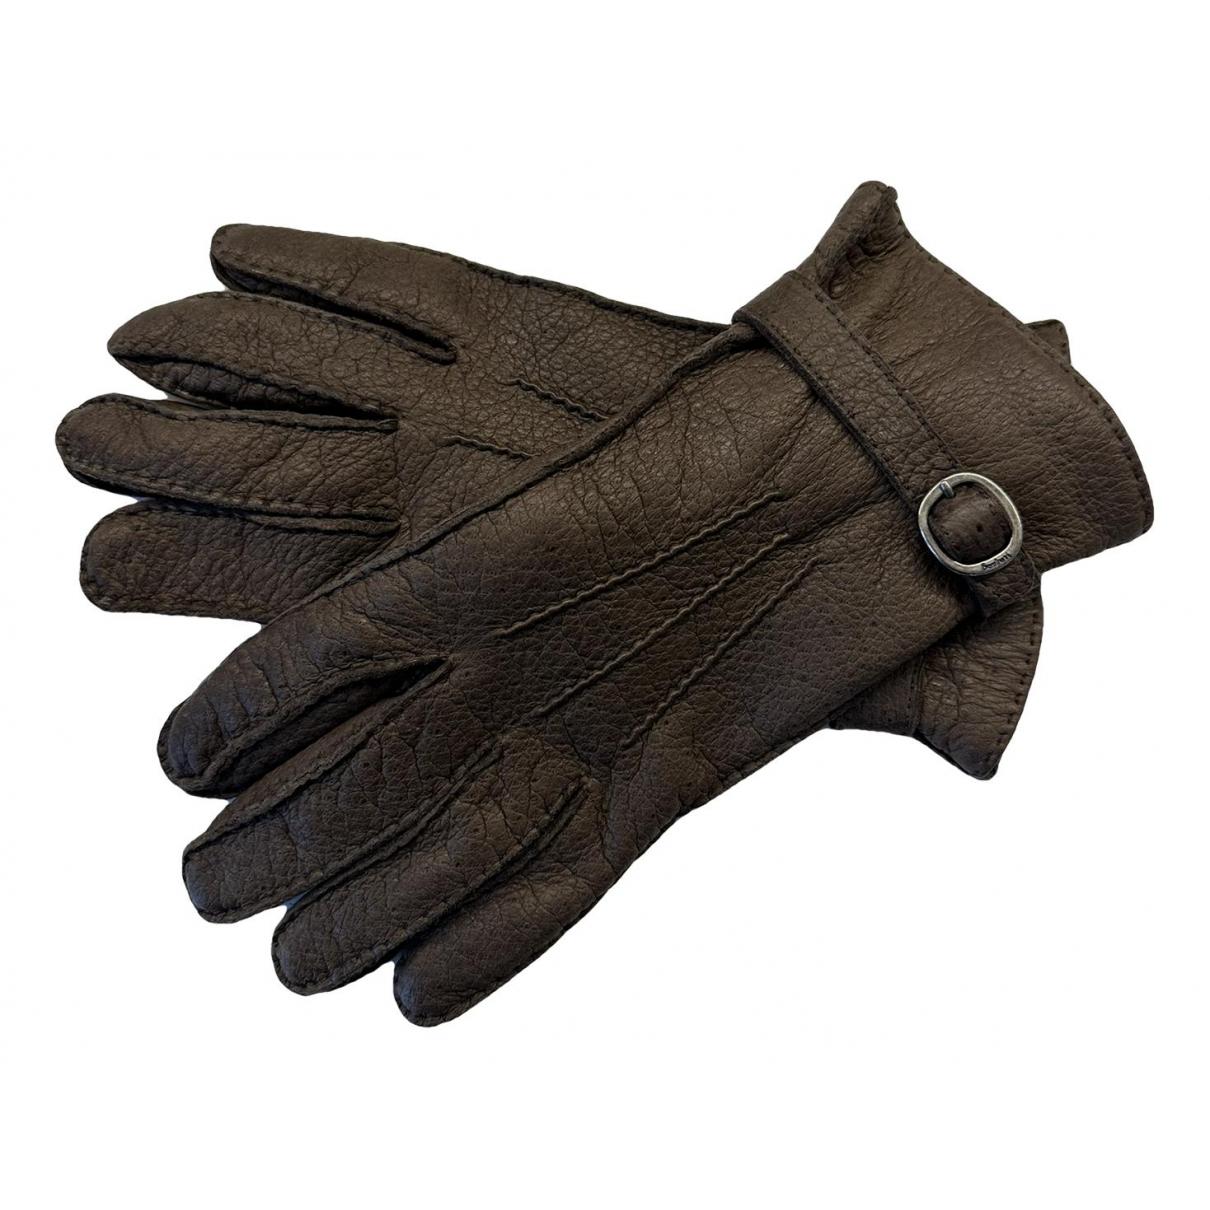 Gloves Louis Vuitton Black size 8.5-9 Inches in Polyester - 37821302